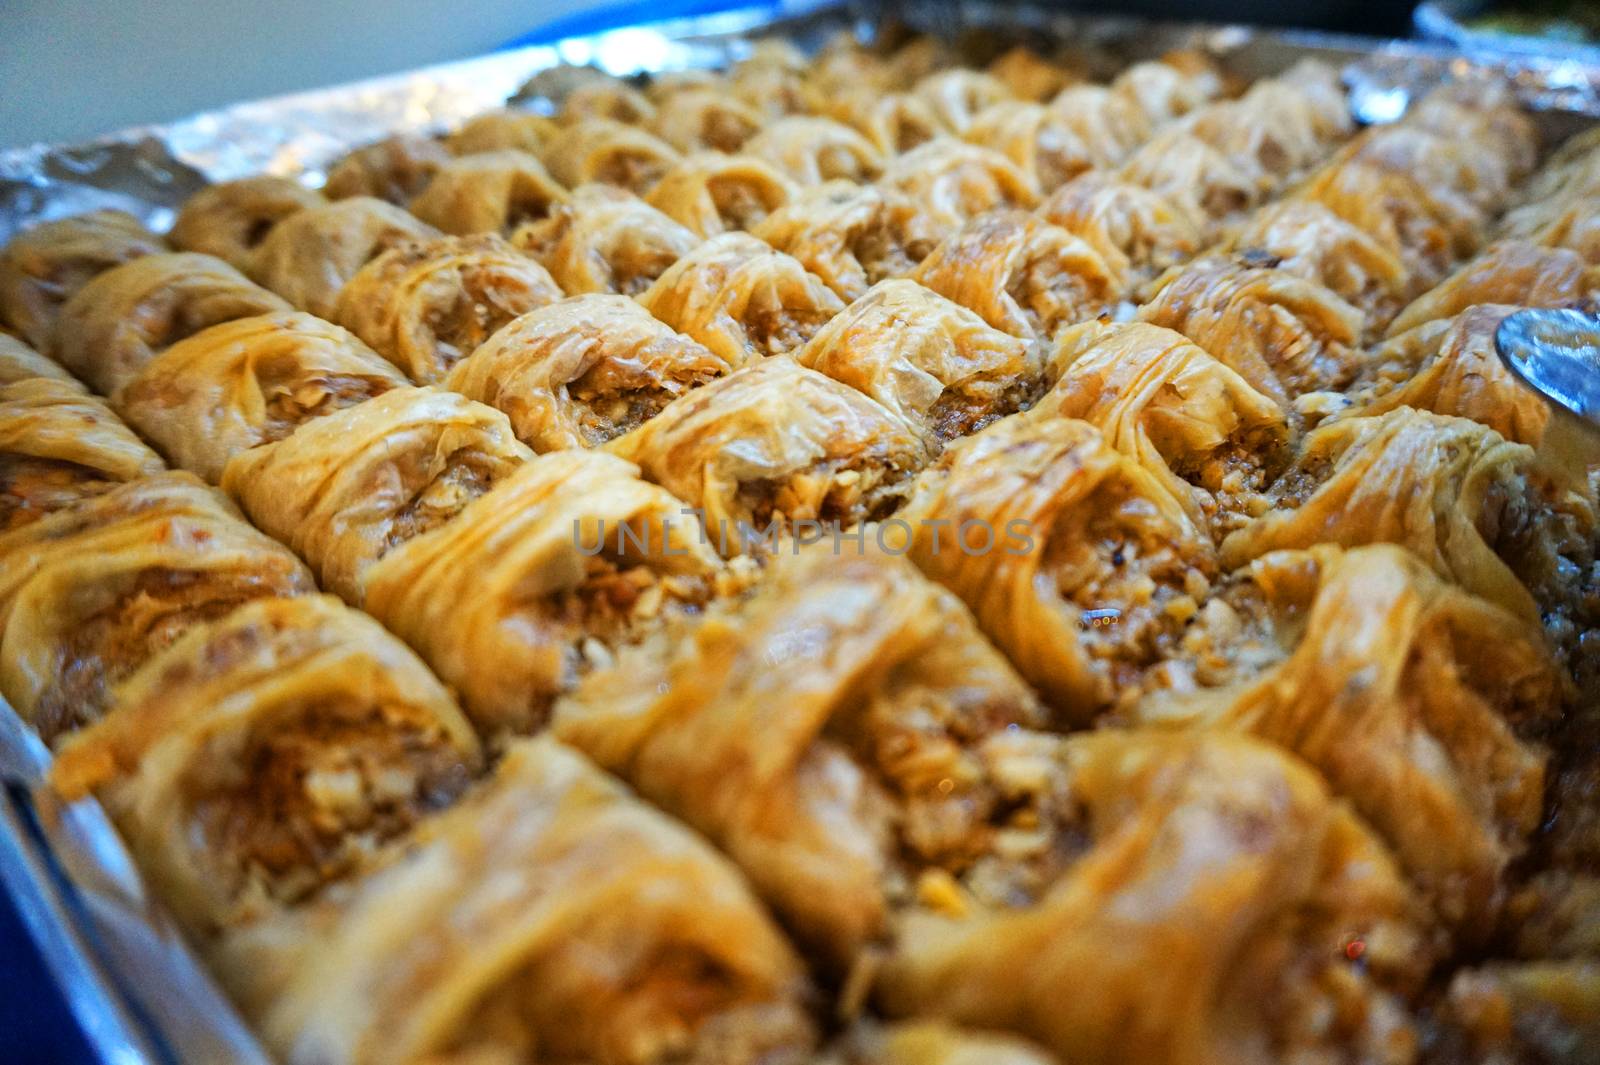 Traditional Arabic dessert-baklava, the concept of celebrating the Holy month of Ramadan and Eid al-Fitr, food background, sweet food.